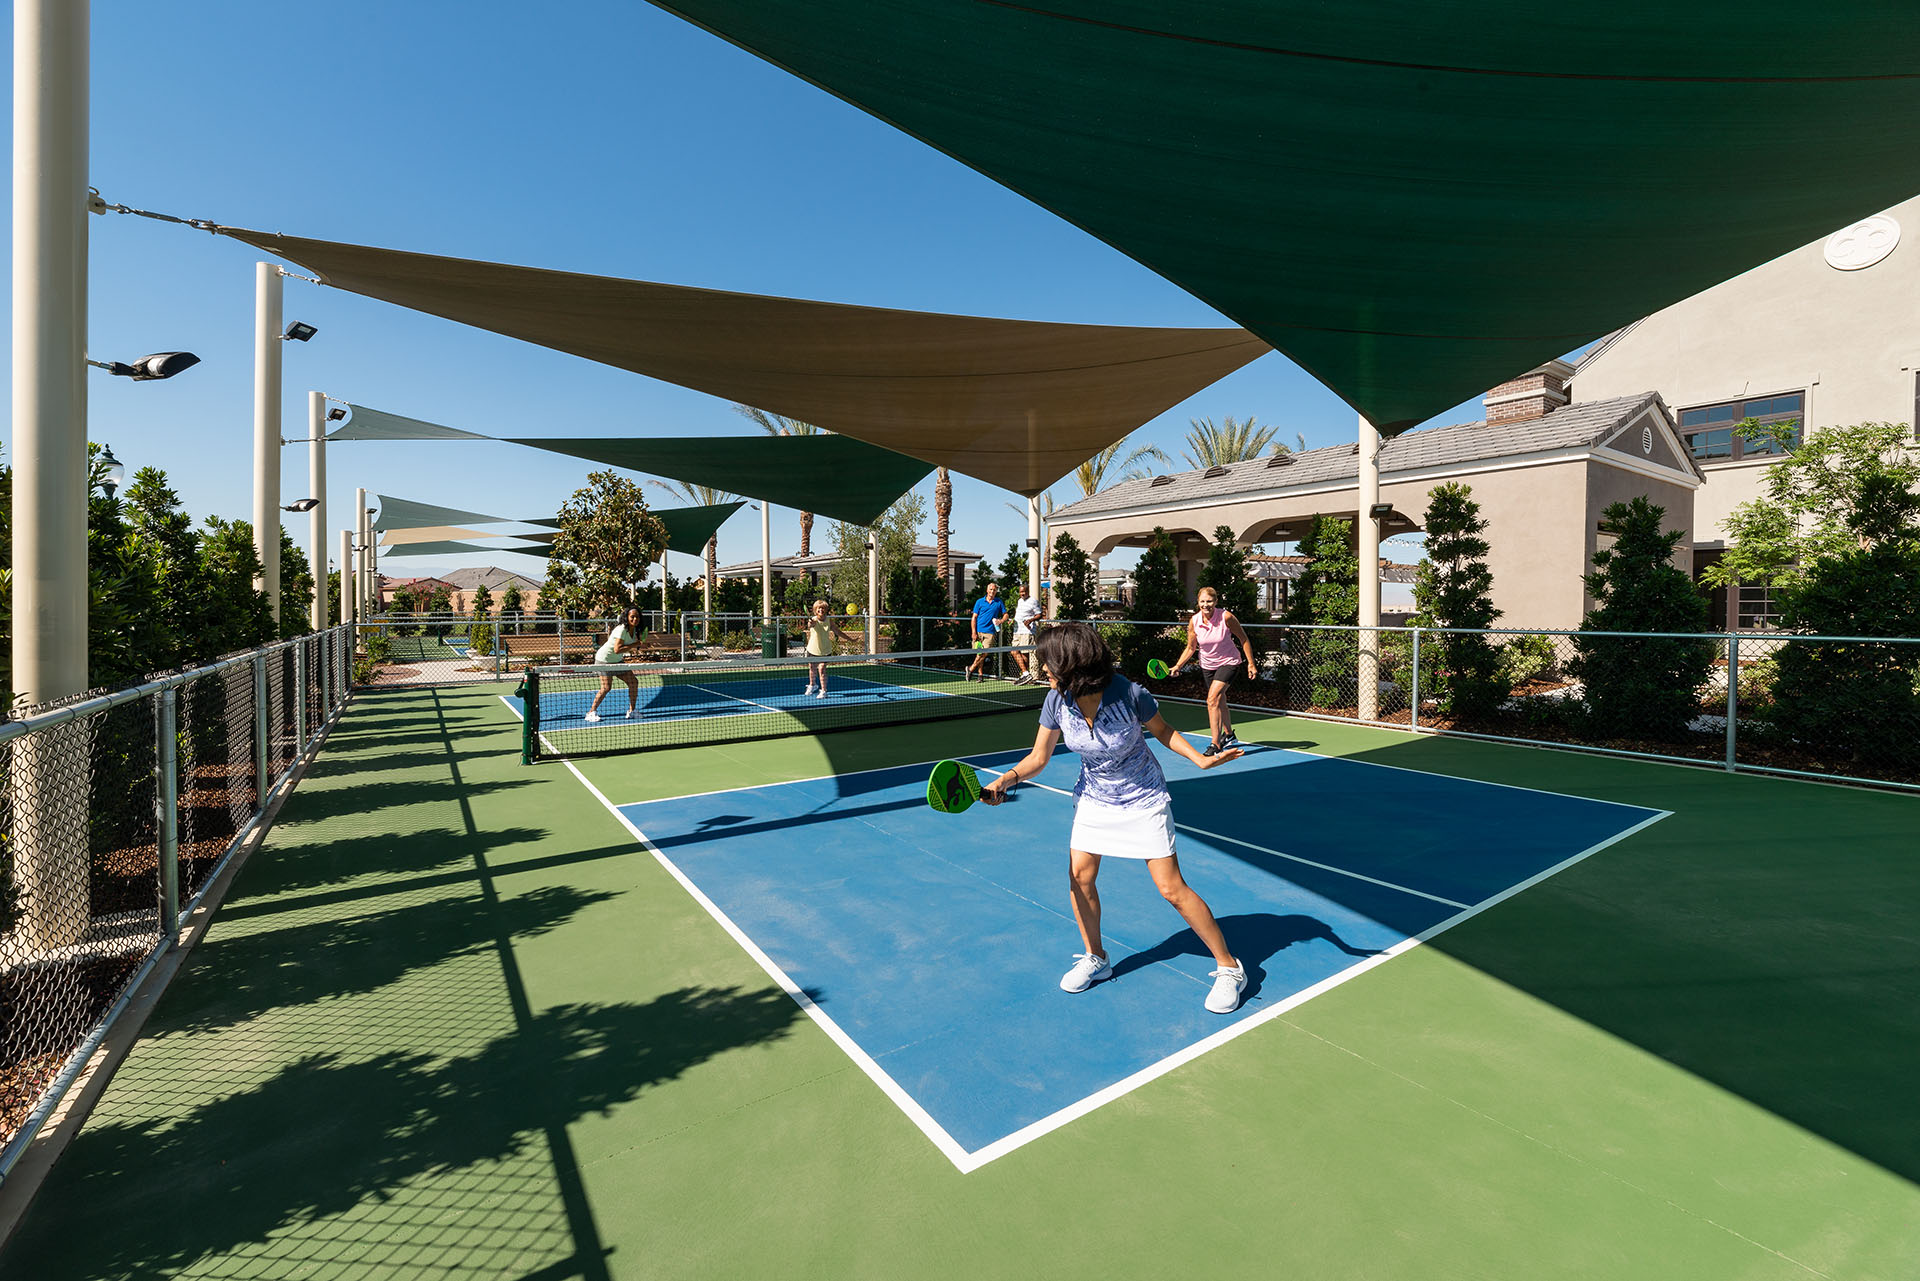 A sunny outdoor pickleball court with players engaged in a game under protective sunshades. residential buildings are visible in the background.